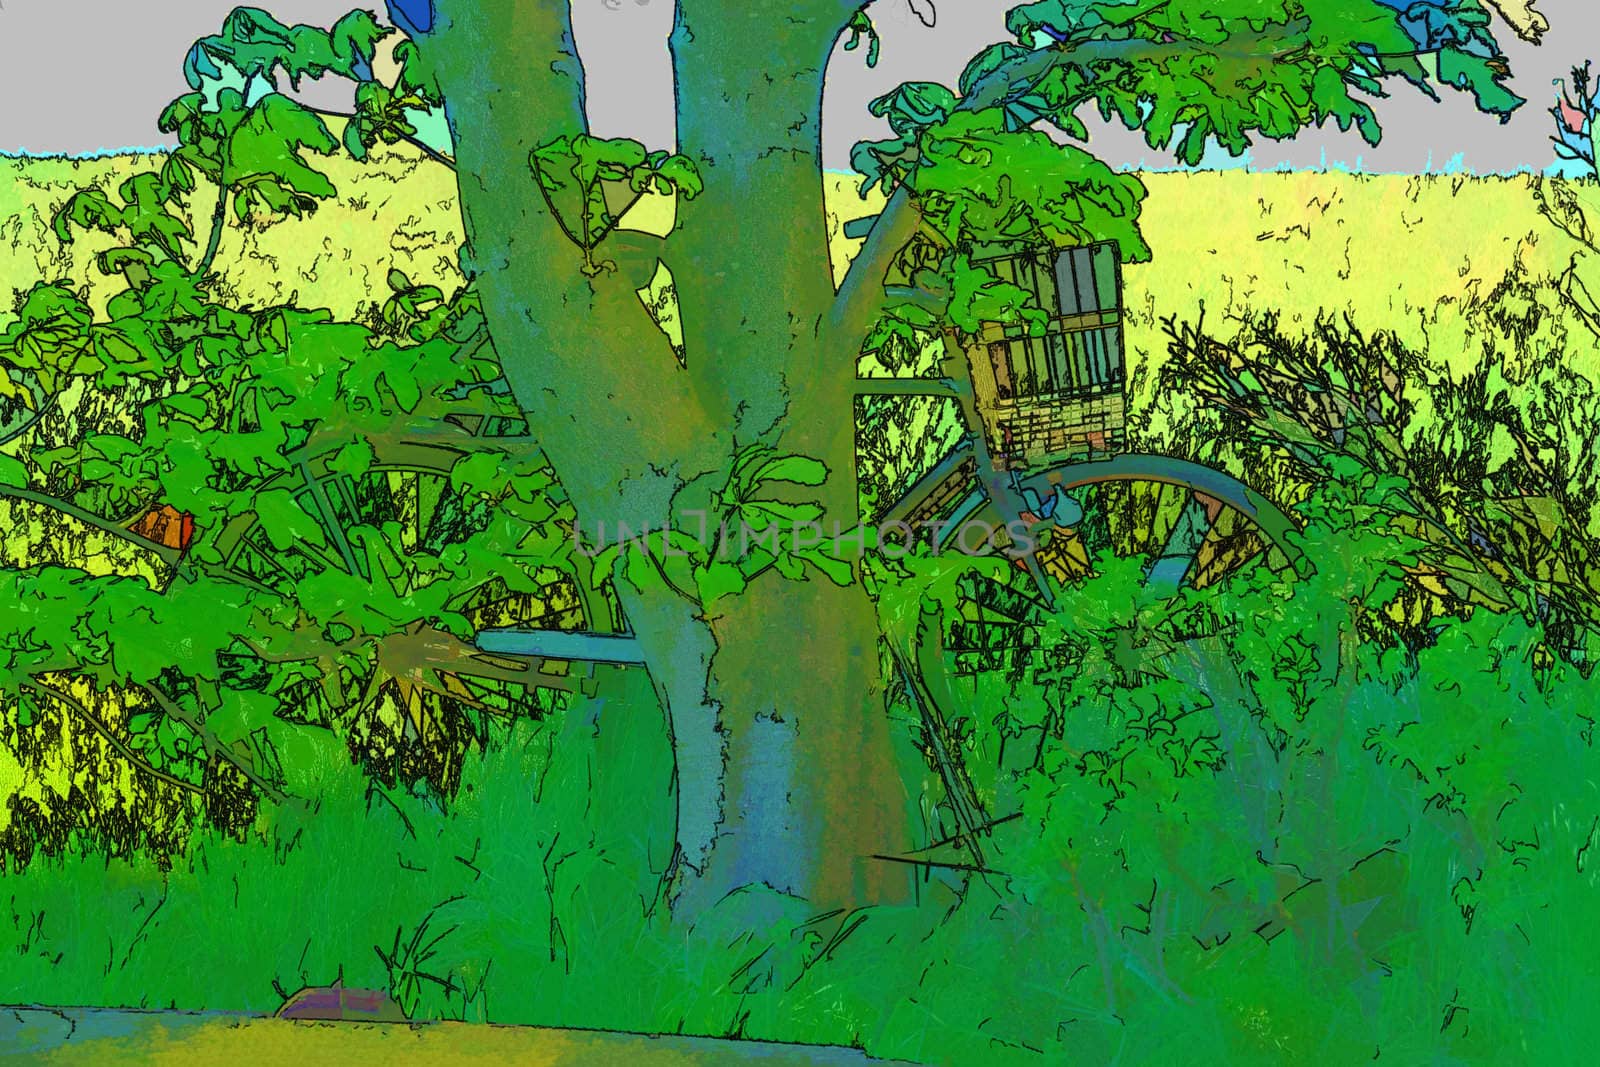 Vintage classical old Bicycle against a tree in field country side picnic outdoors digital art manipulation